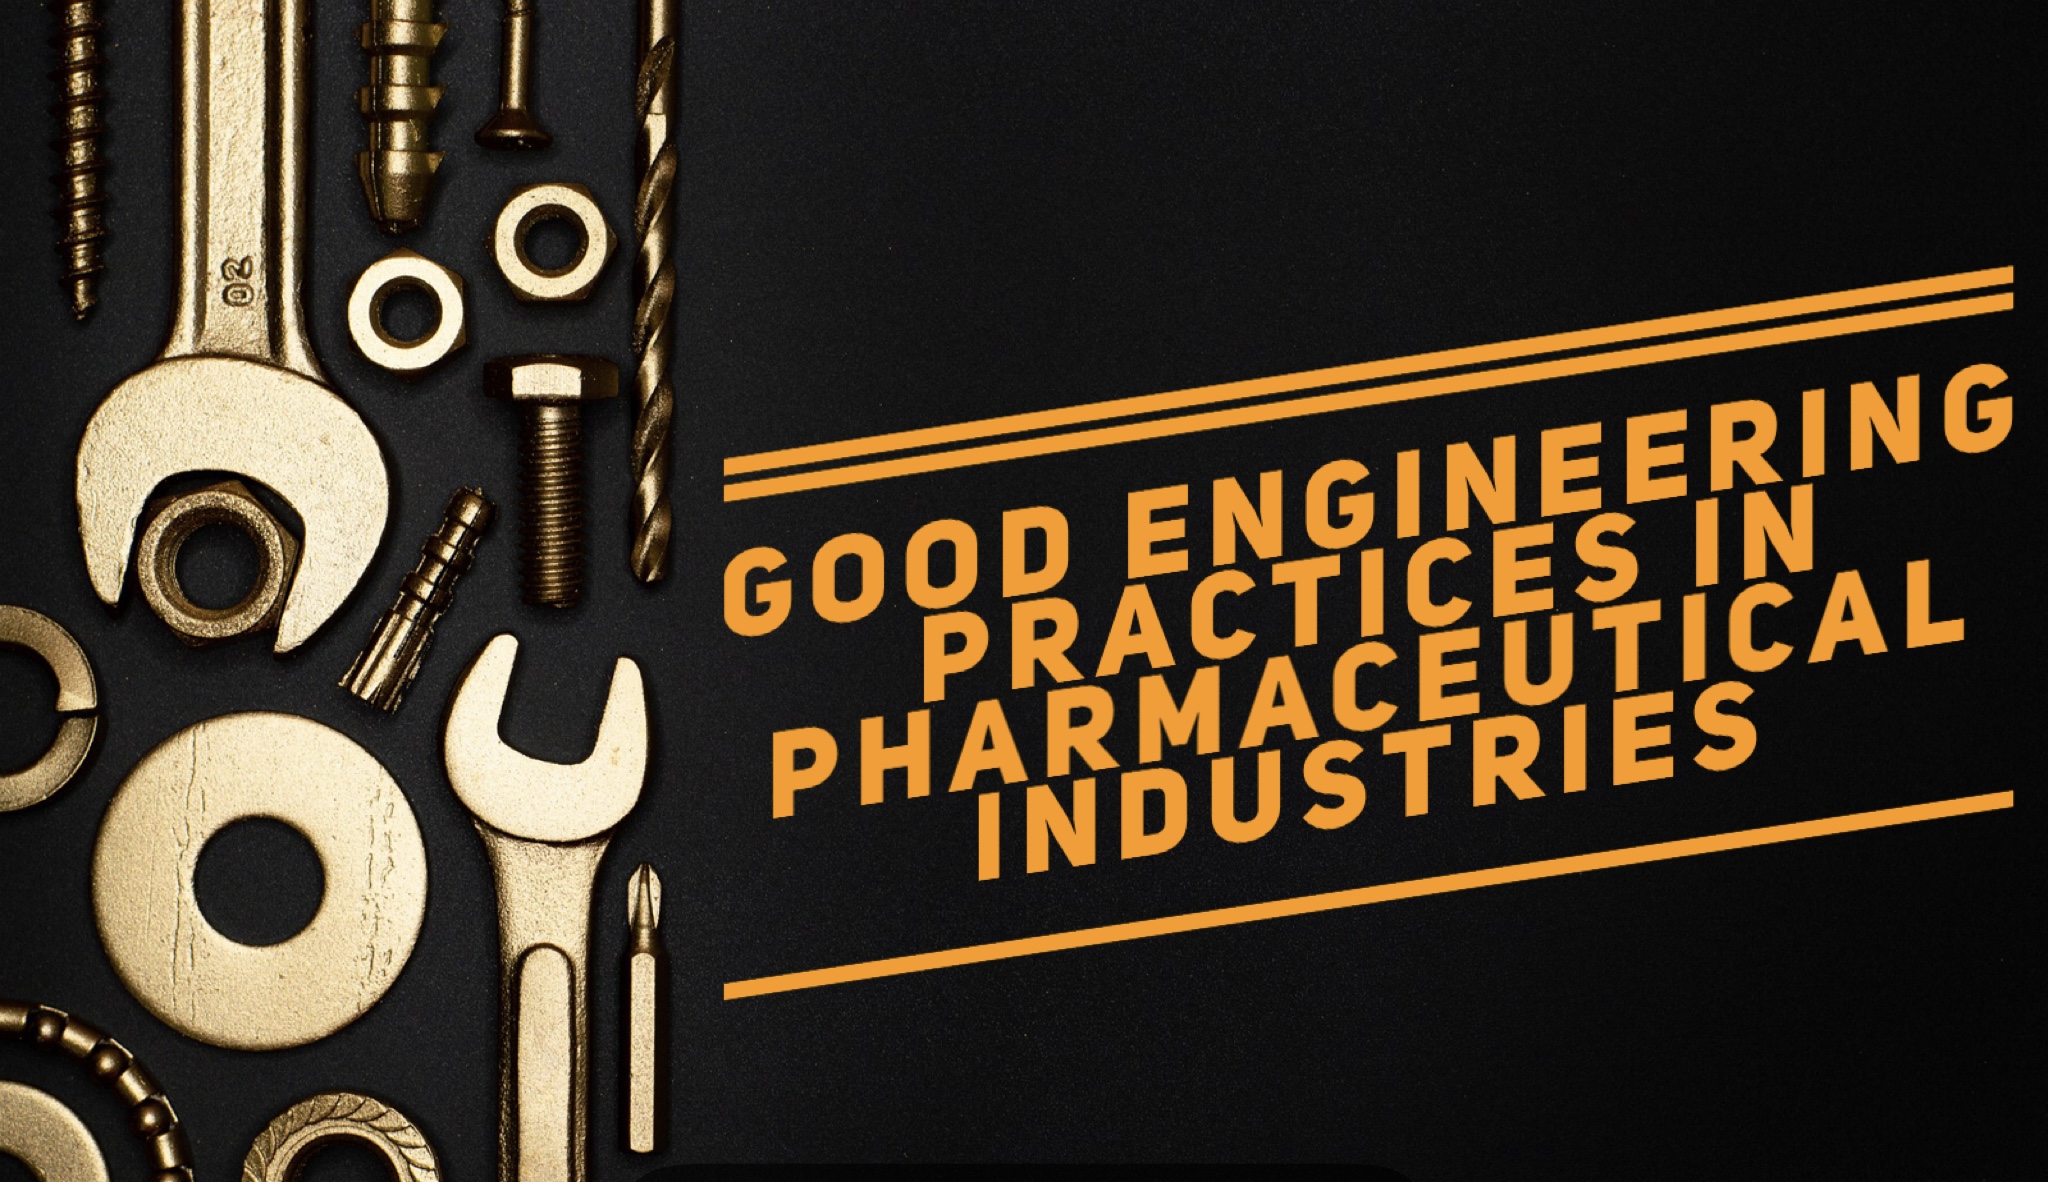 Good Engineering Practices in Pharmaceutical Industry ppt